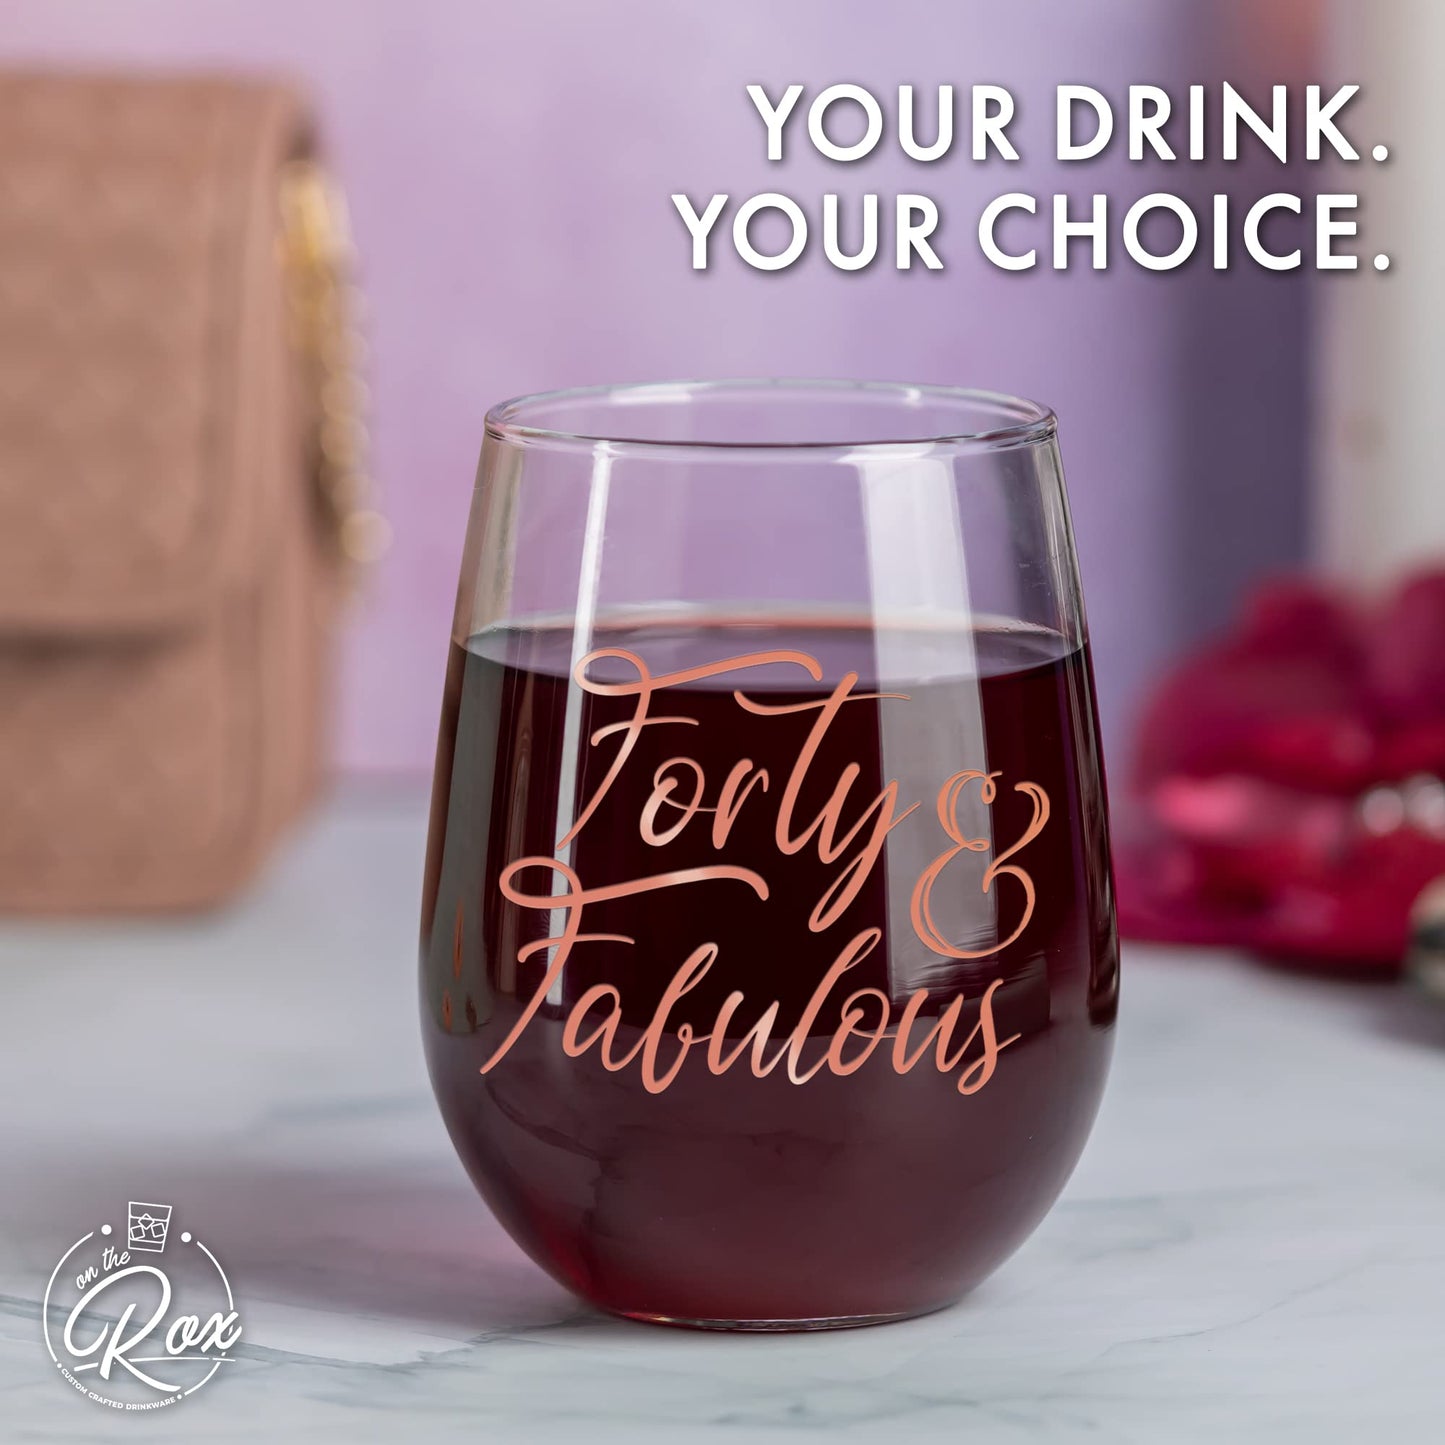 On The Rox Drinks 40th Birthday Gift for Women - 40 & Fabulous- 40 Year Old Wine Glass Birthday Gift- Rose Gold Print Ideal for Women - 17 oz